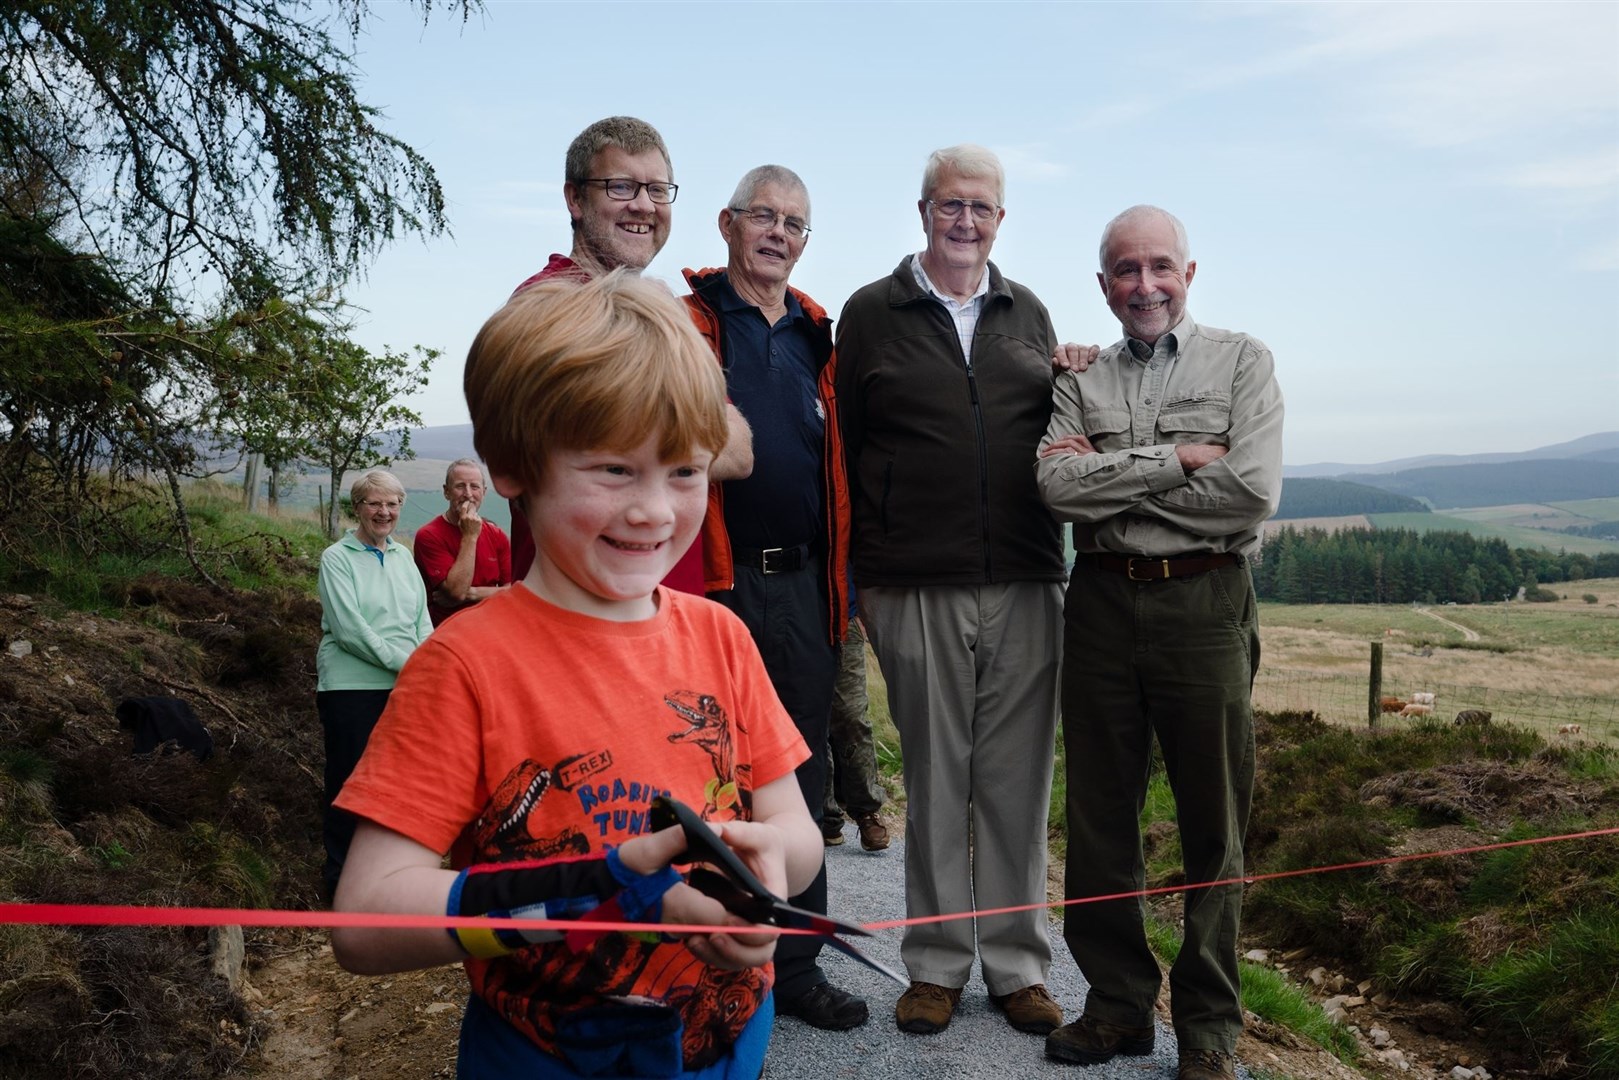 Henry Moir, aged 7, cutting the ribbon. Also pictured are Grant Moir of the Cairngorms National Park Authority, Tony Birchall and Brian Fowler of the Glenlivet Walking Group and Steve Smith of the Tomintoul and Glenlivet Landscape Partnership.